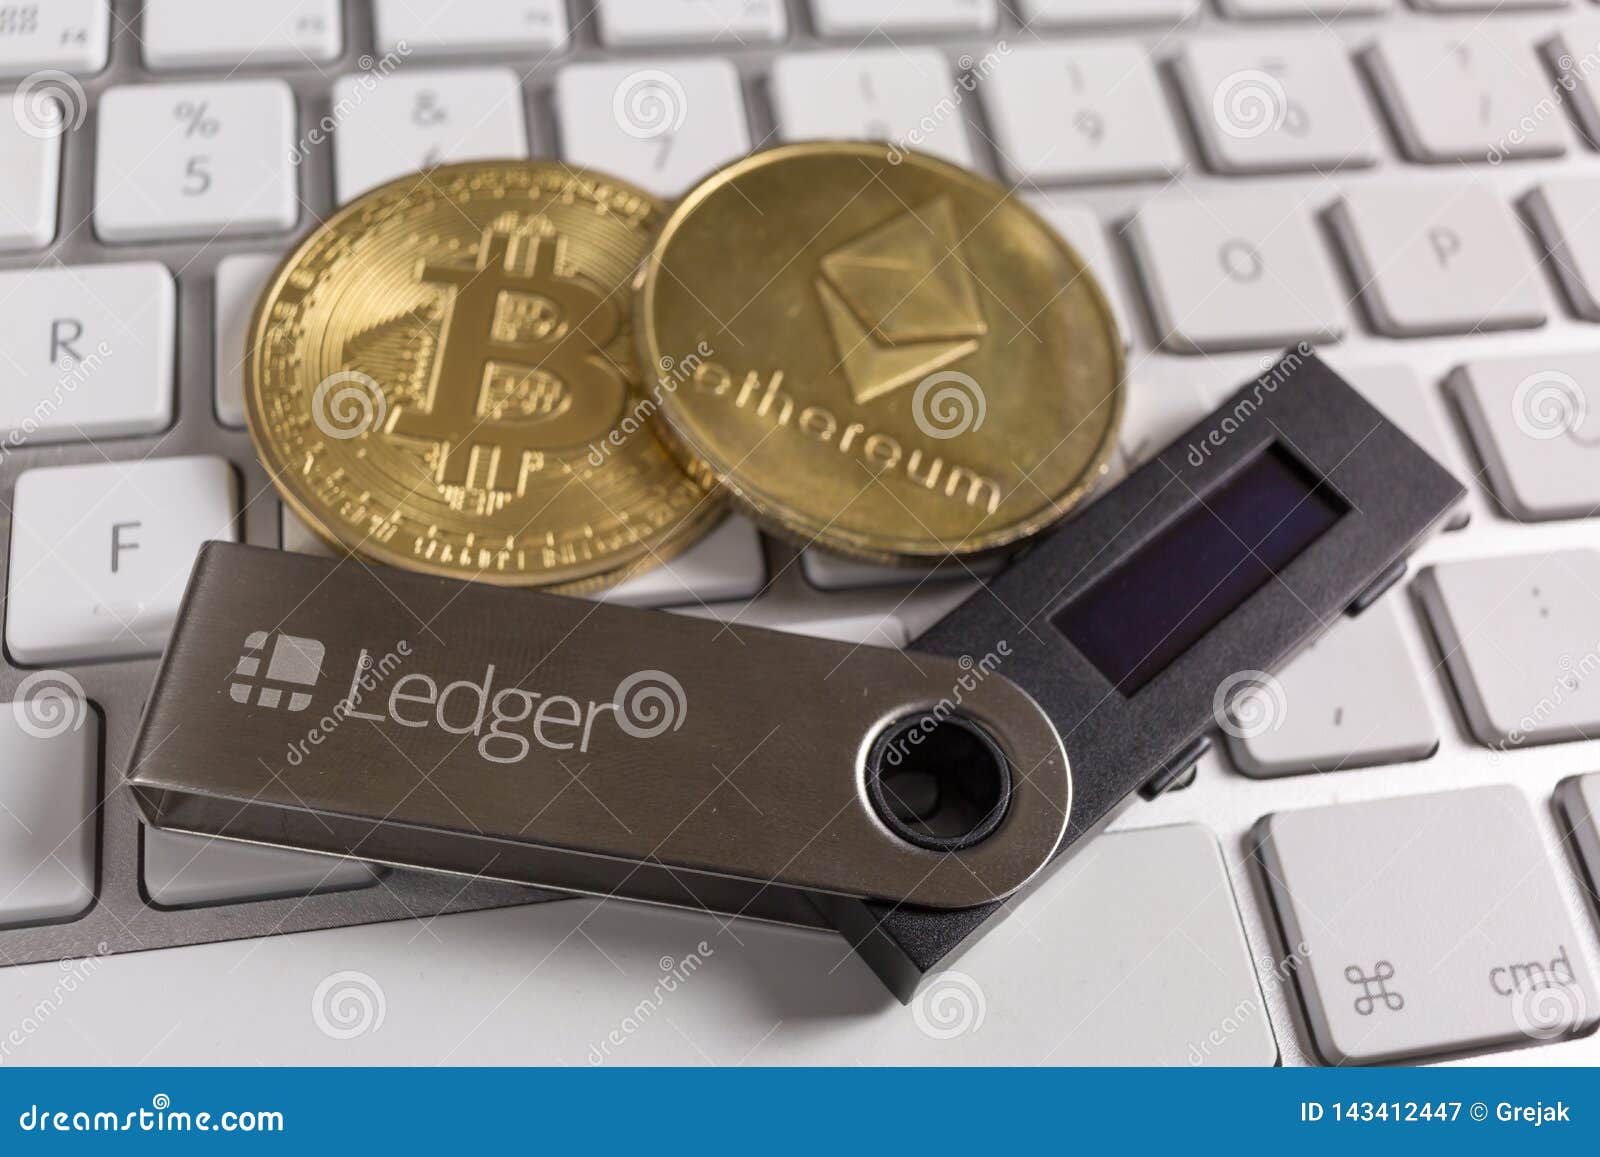 crypto currency ledger wallet